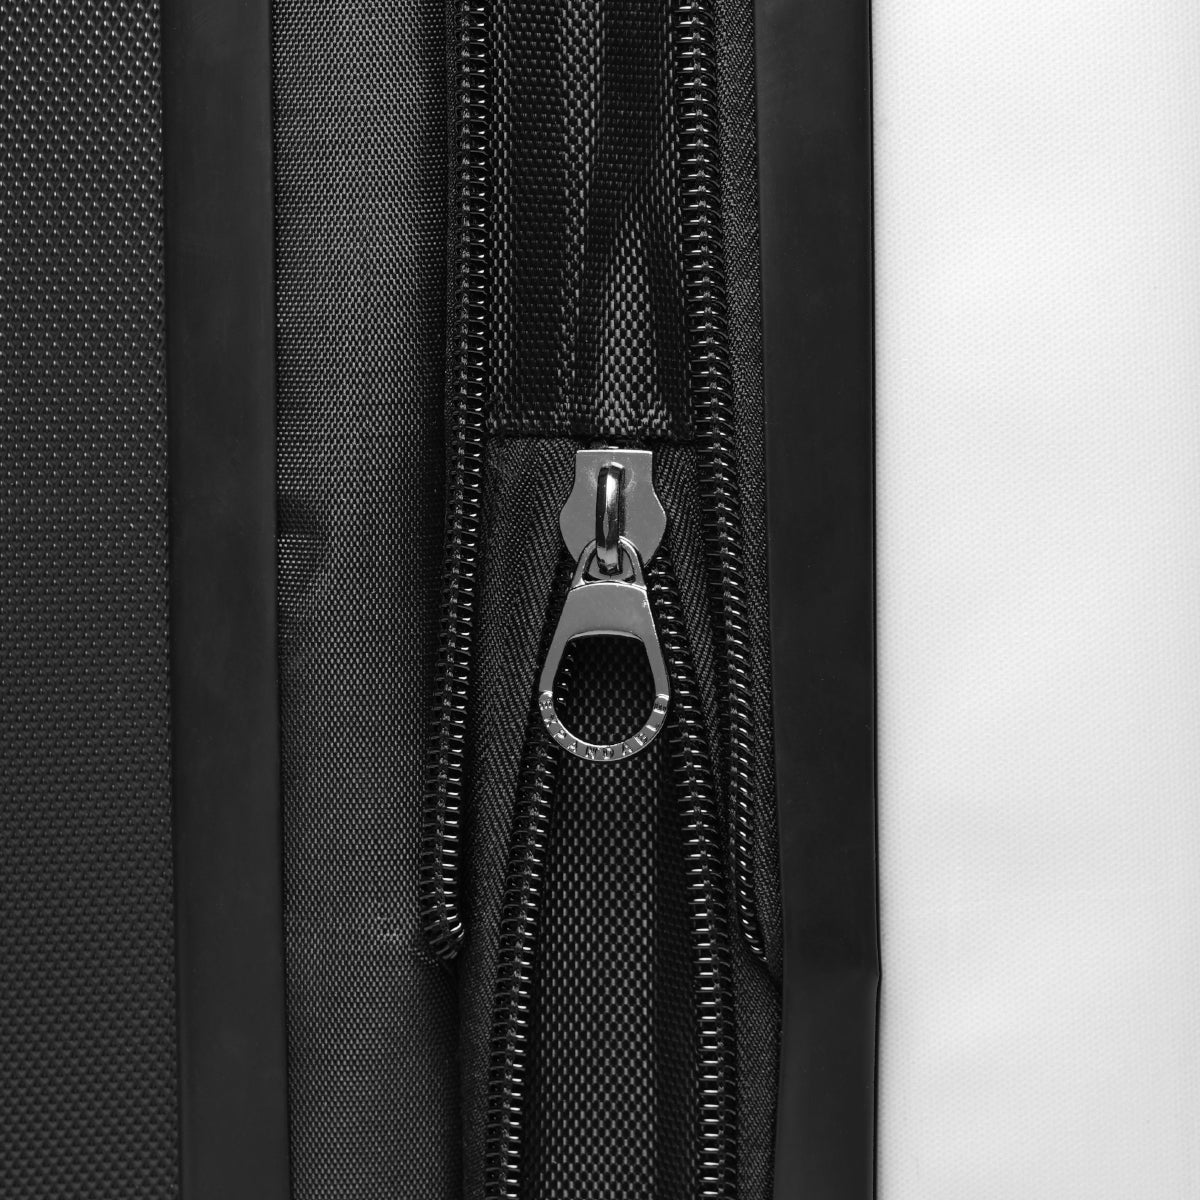 Getrott Miles Davis Bitches Brew 1969 Black Cabin Suitcase Inner Pockets Extended Storage Adjustable Telescopic Handle Inner Pockets Double wheeled Polycarbonate Hard-shell Built-in Lock